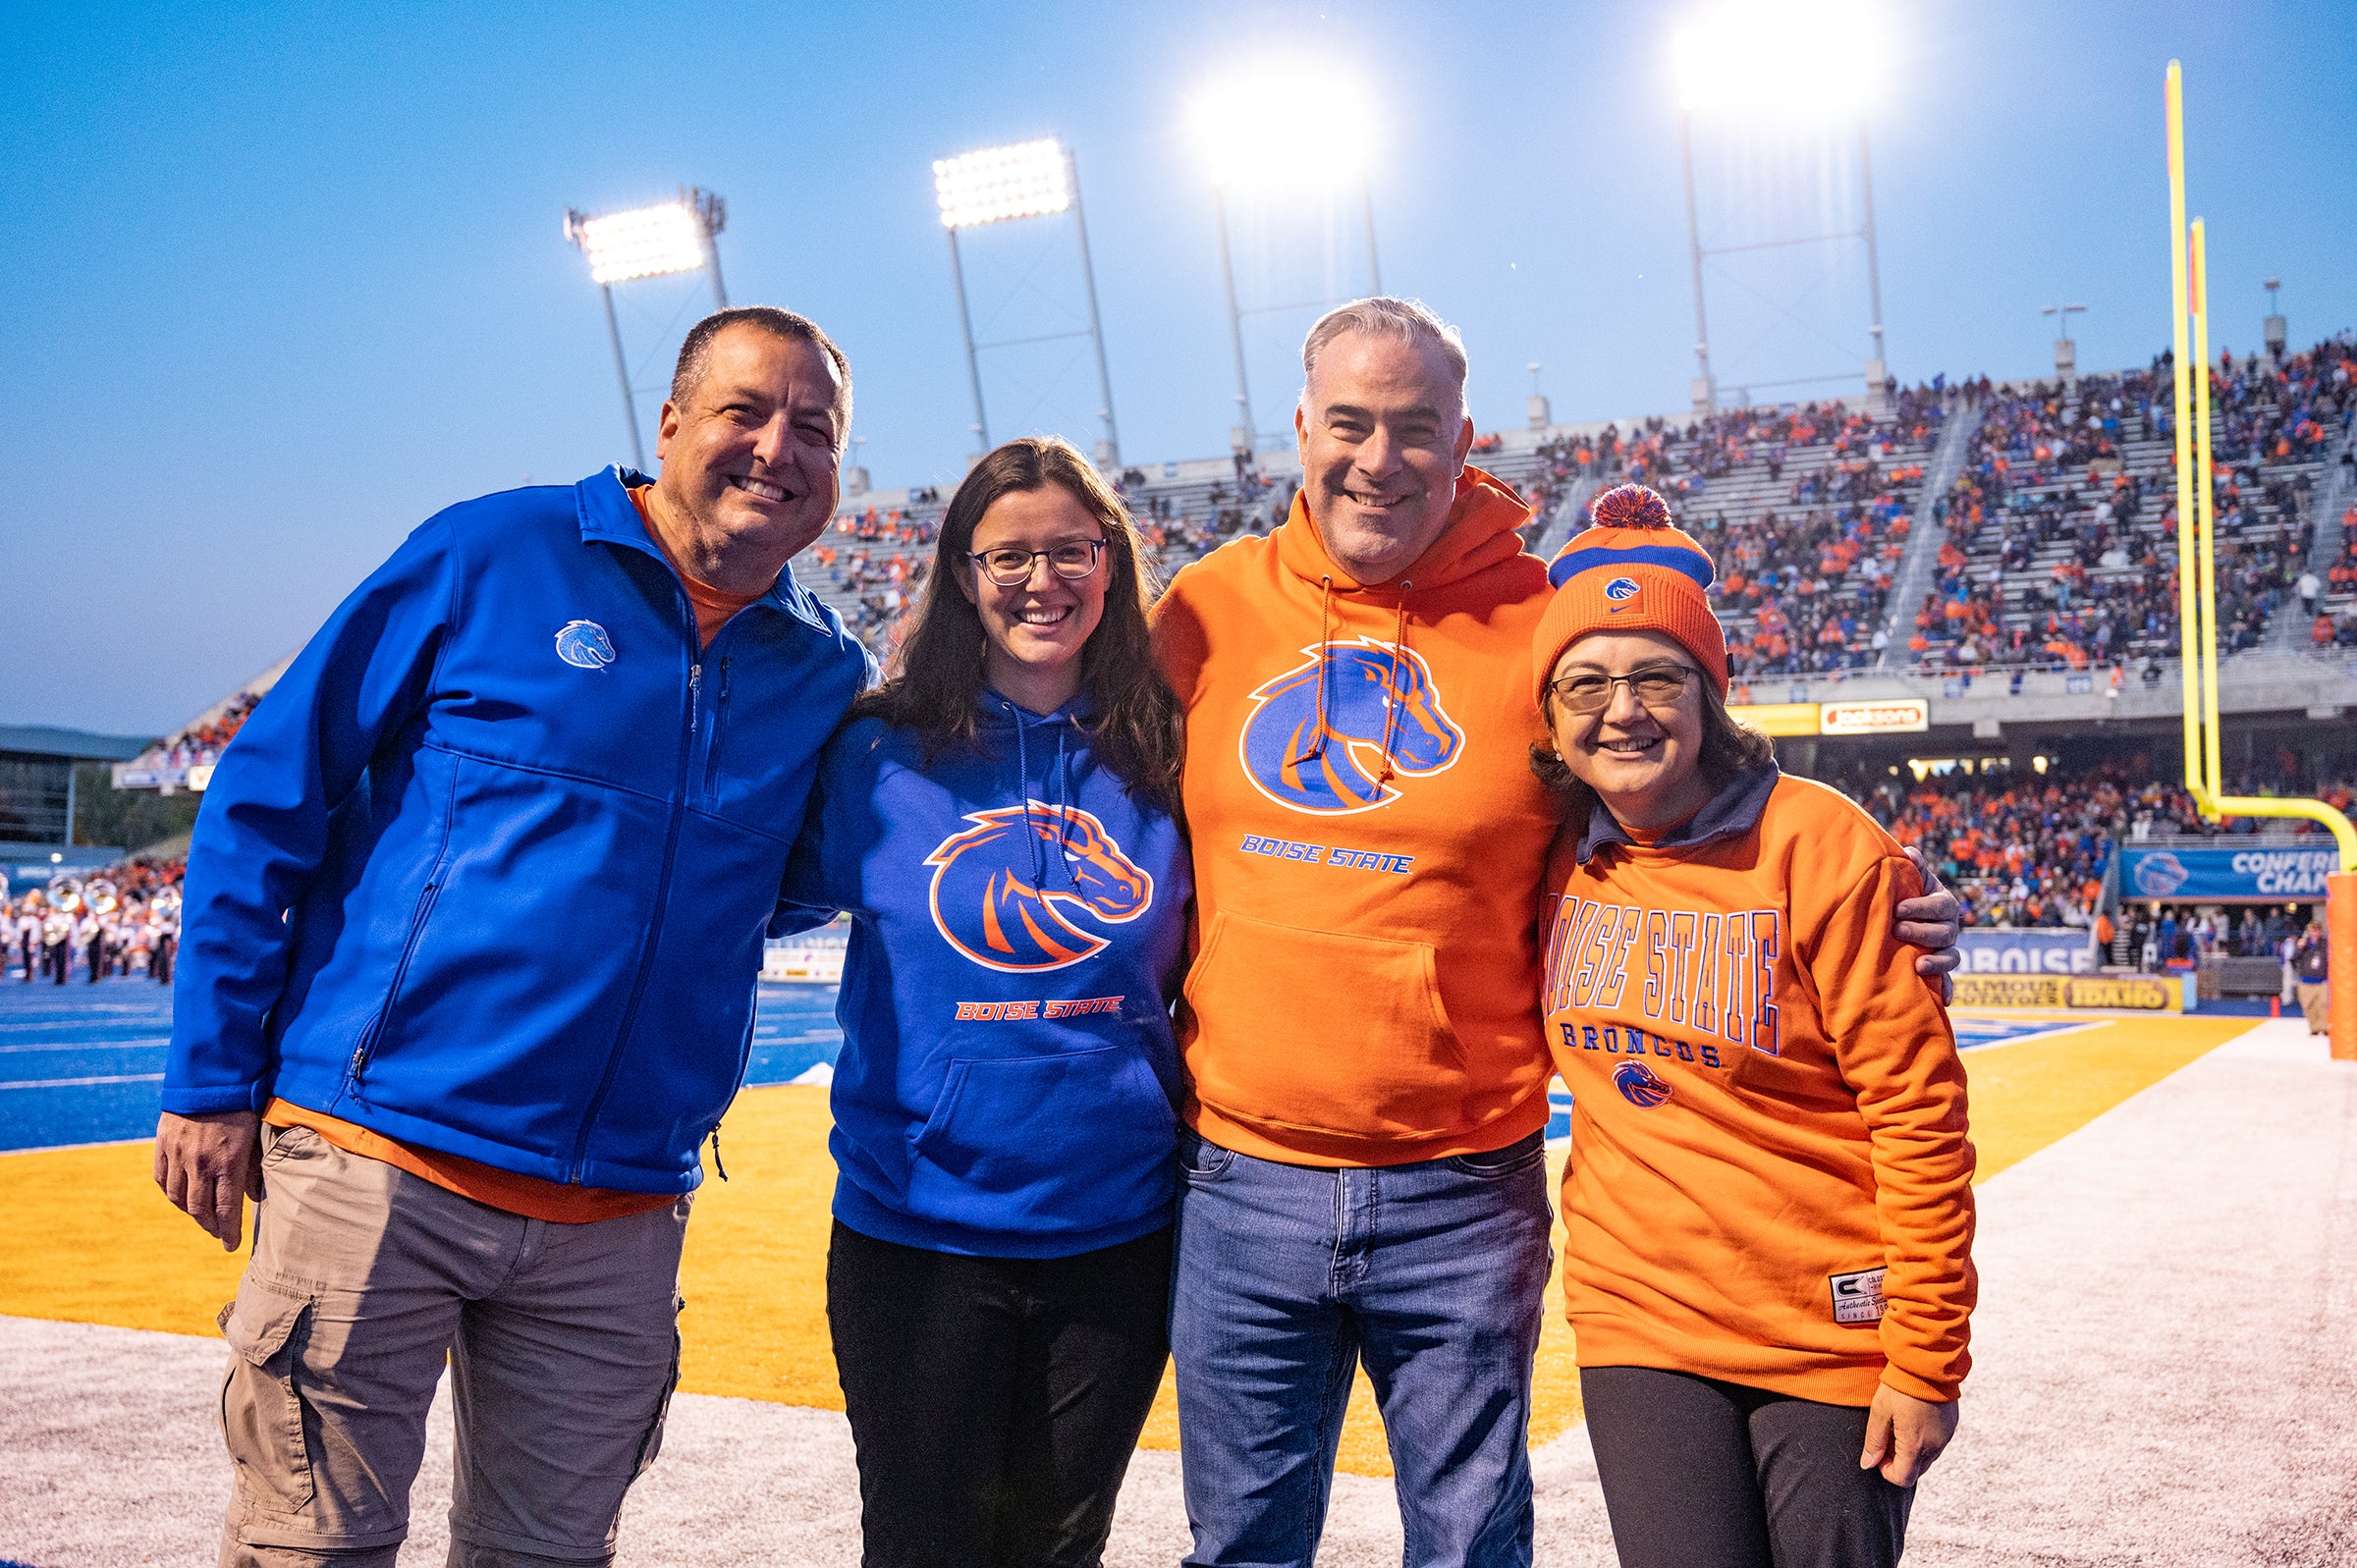 Members of Boise State faculty on the Blue Turf